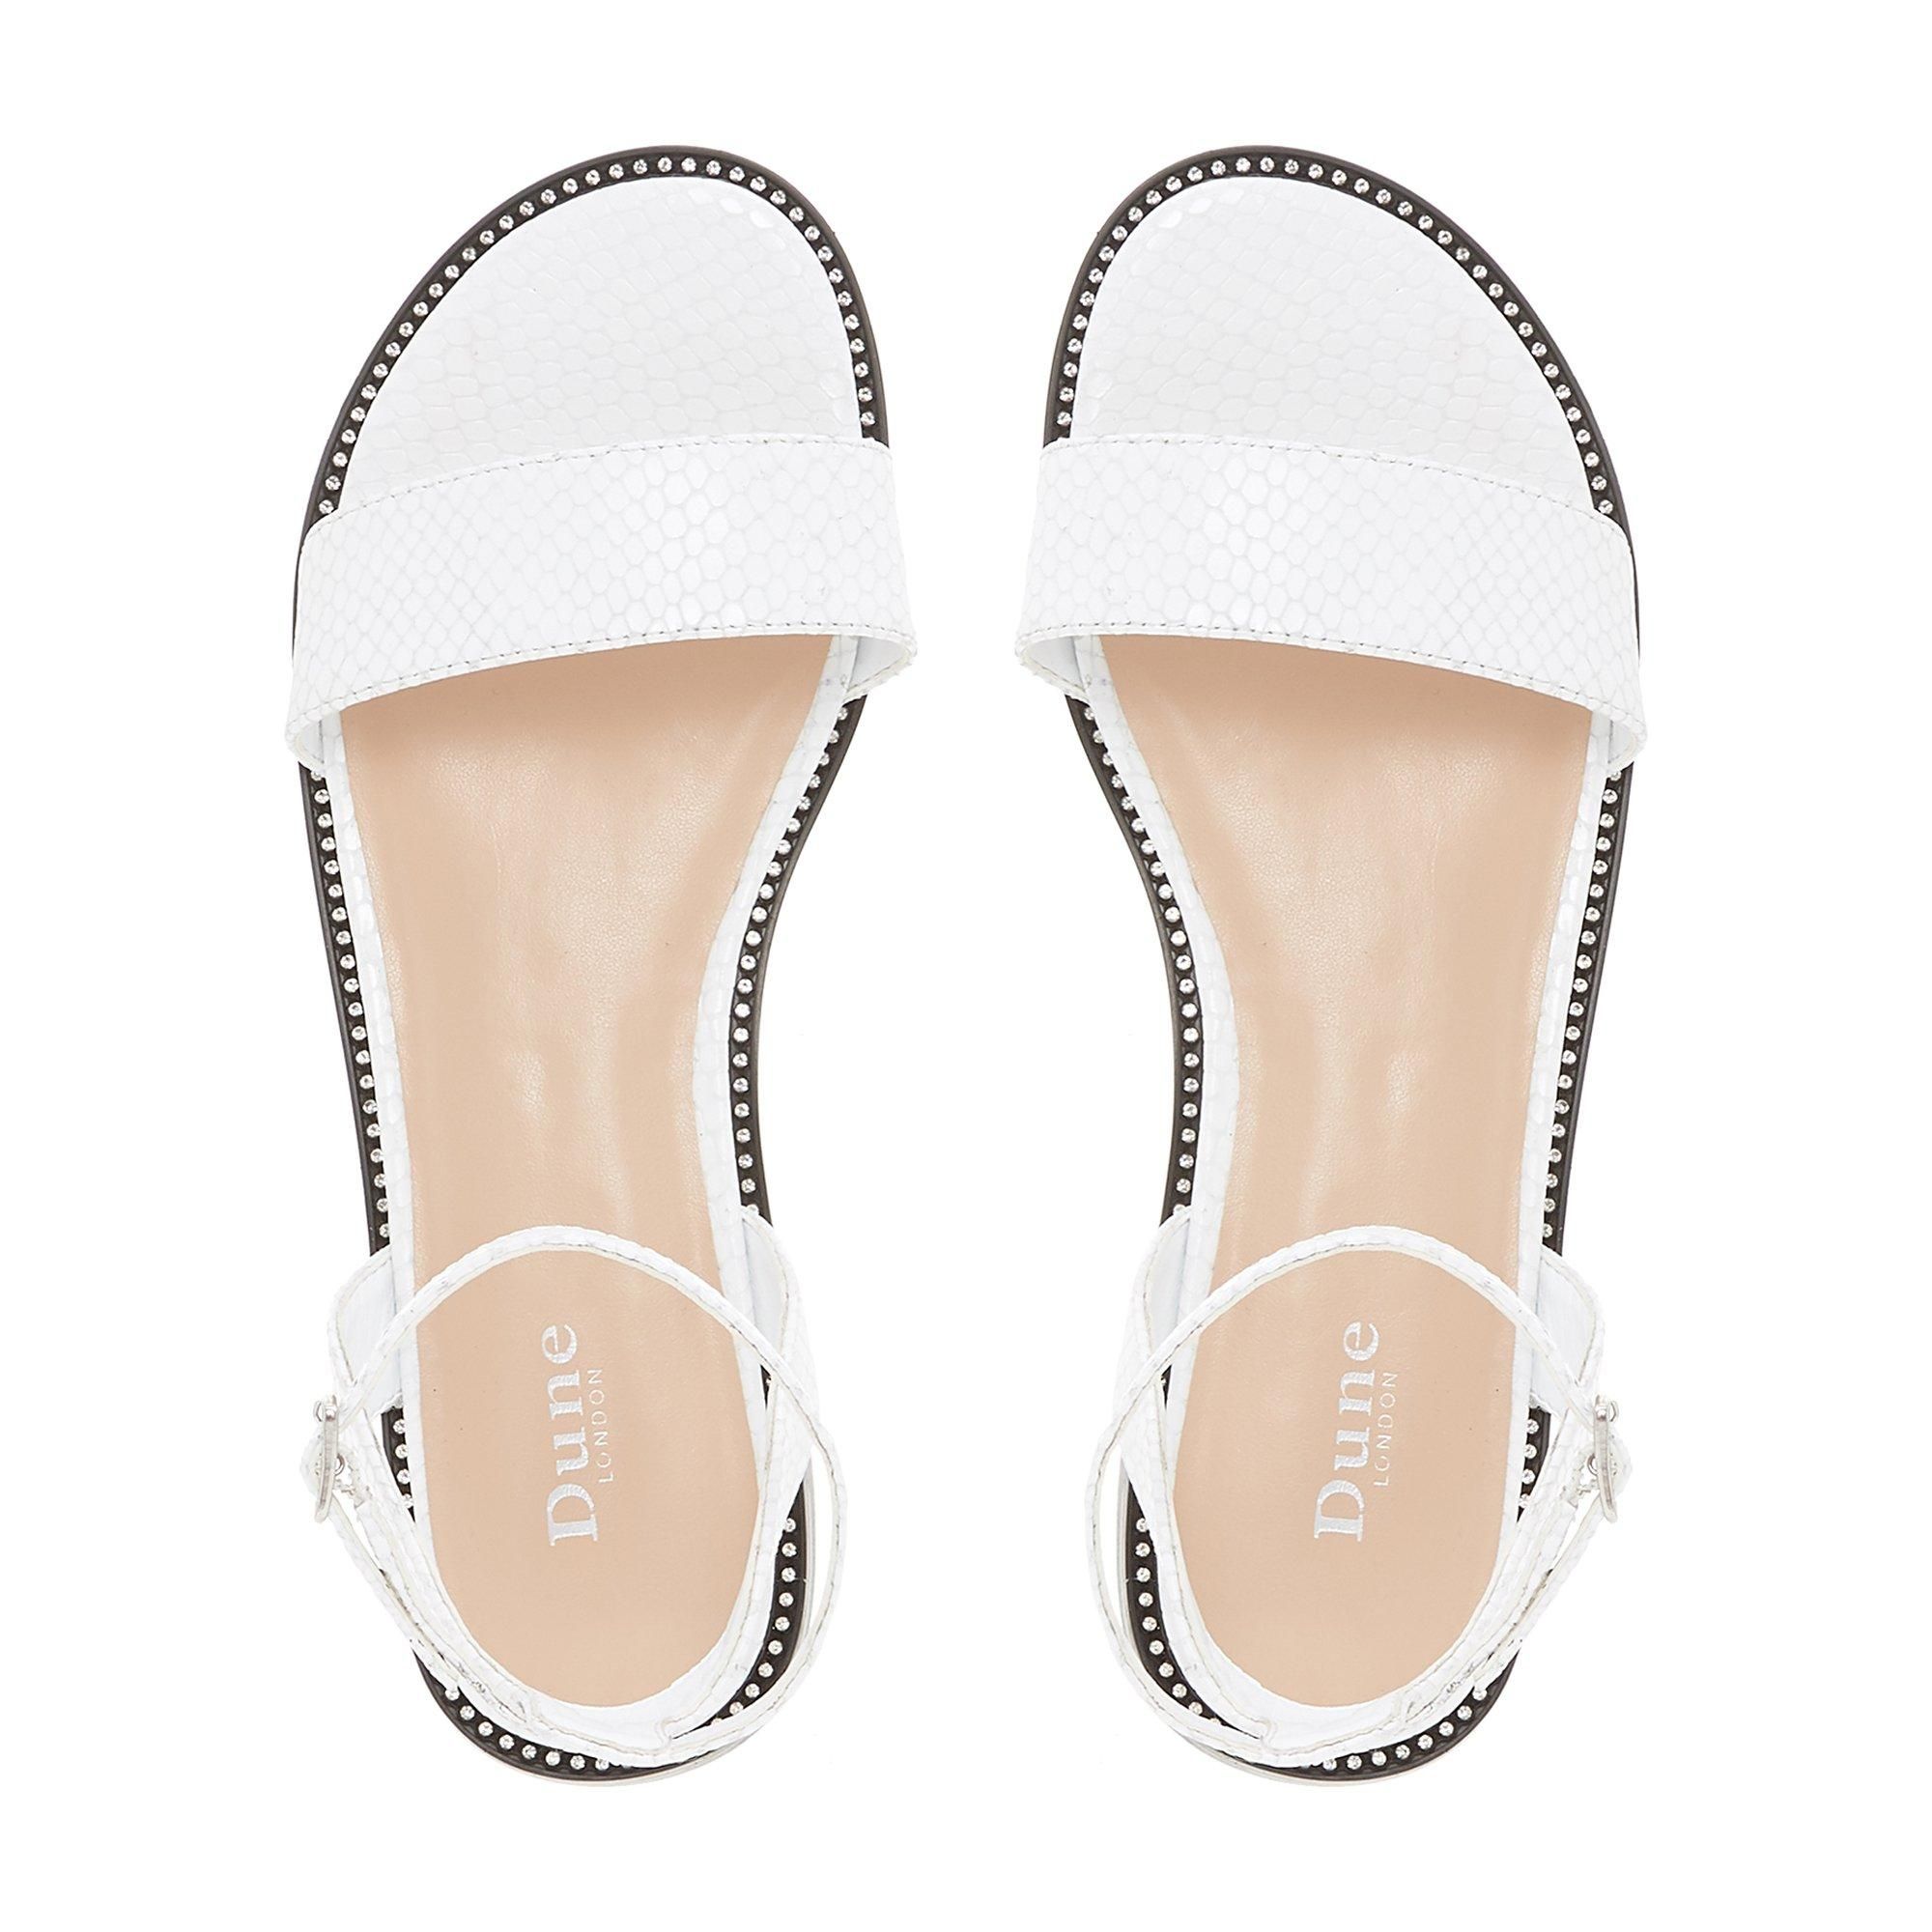 The Dune London Nance two part sandal is a chic summertime style. Featuring a textured slim front strap, an open back and ankle strap. It's perched on a low block heel with an understated studded trim.